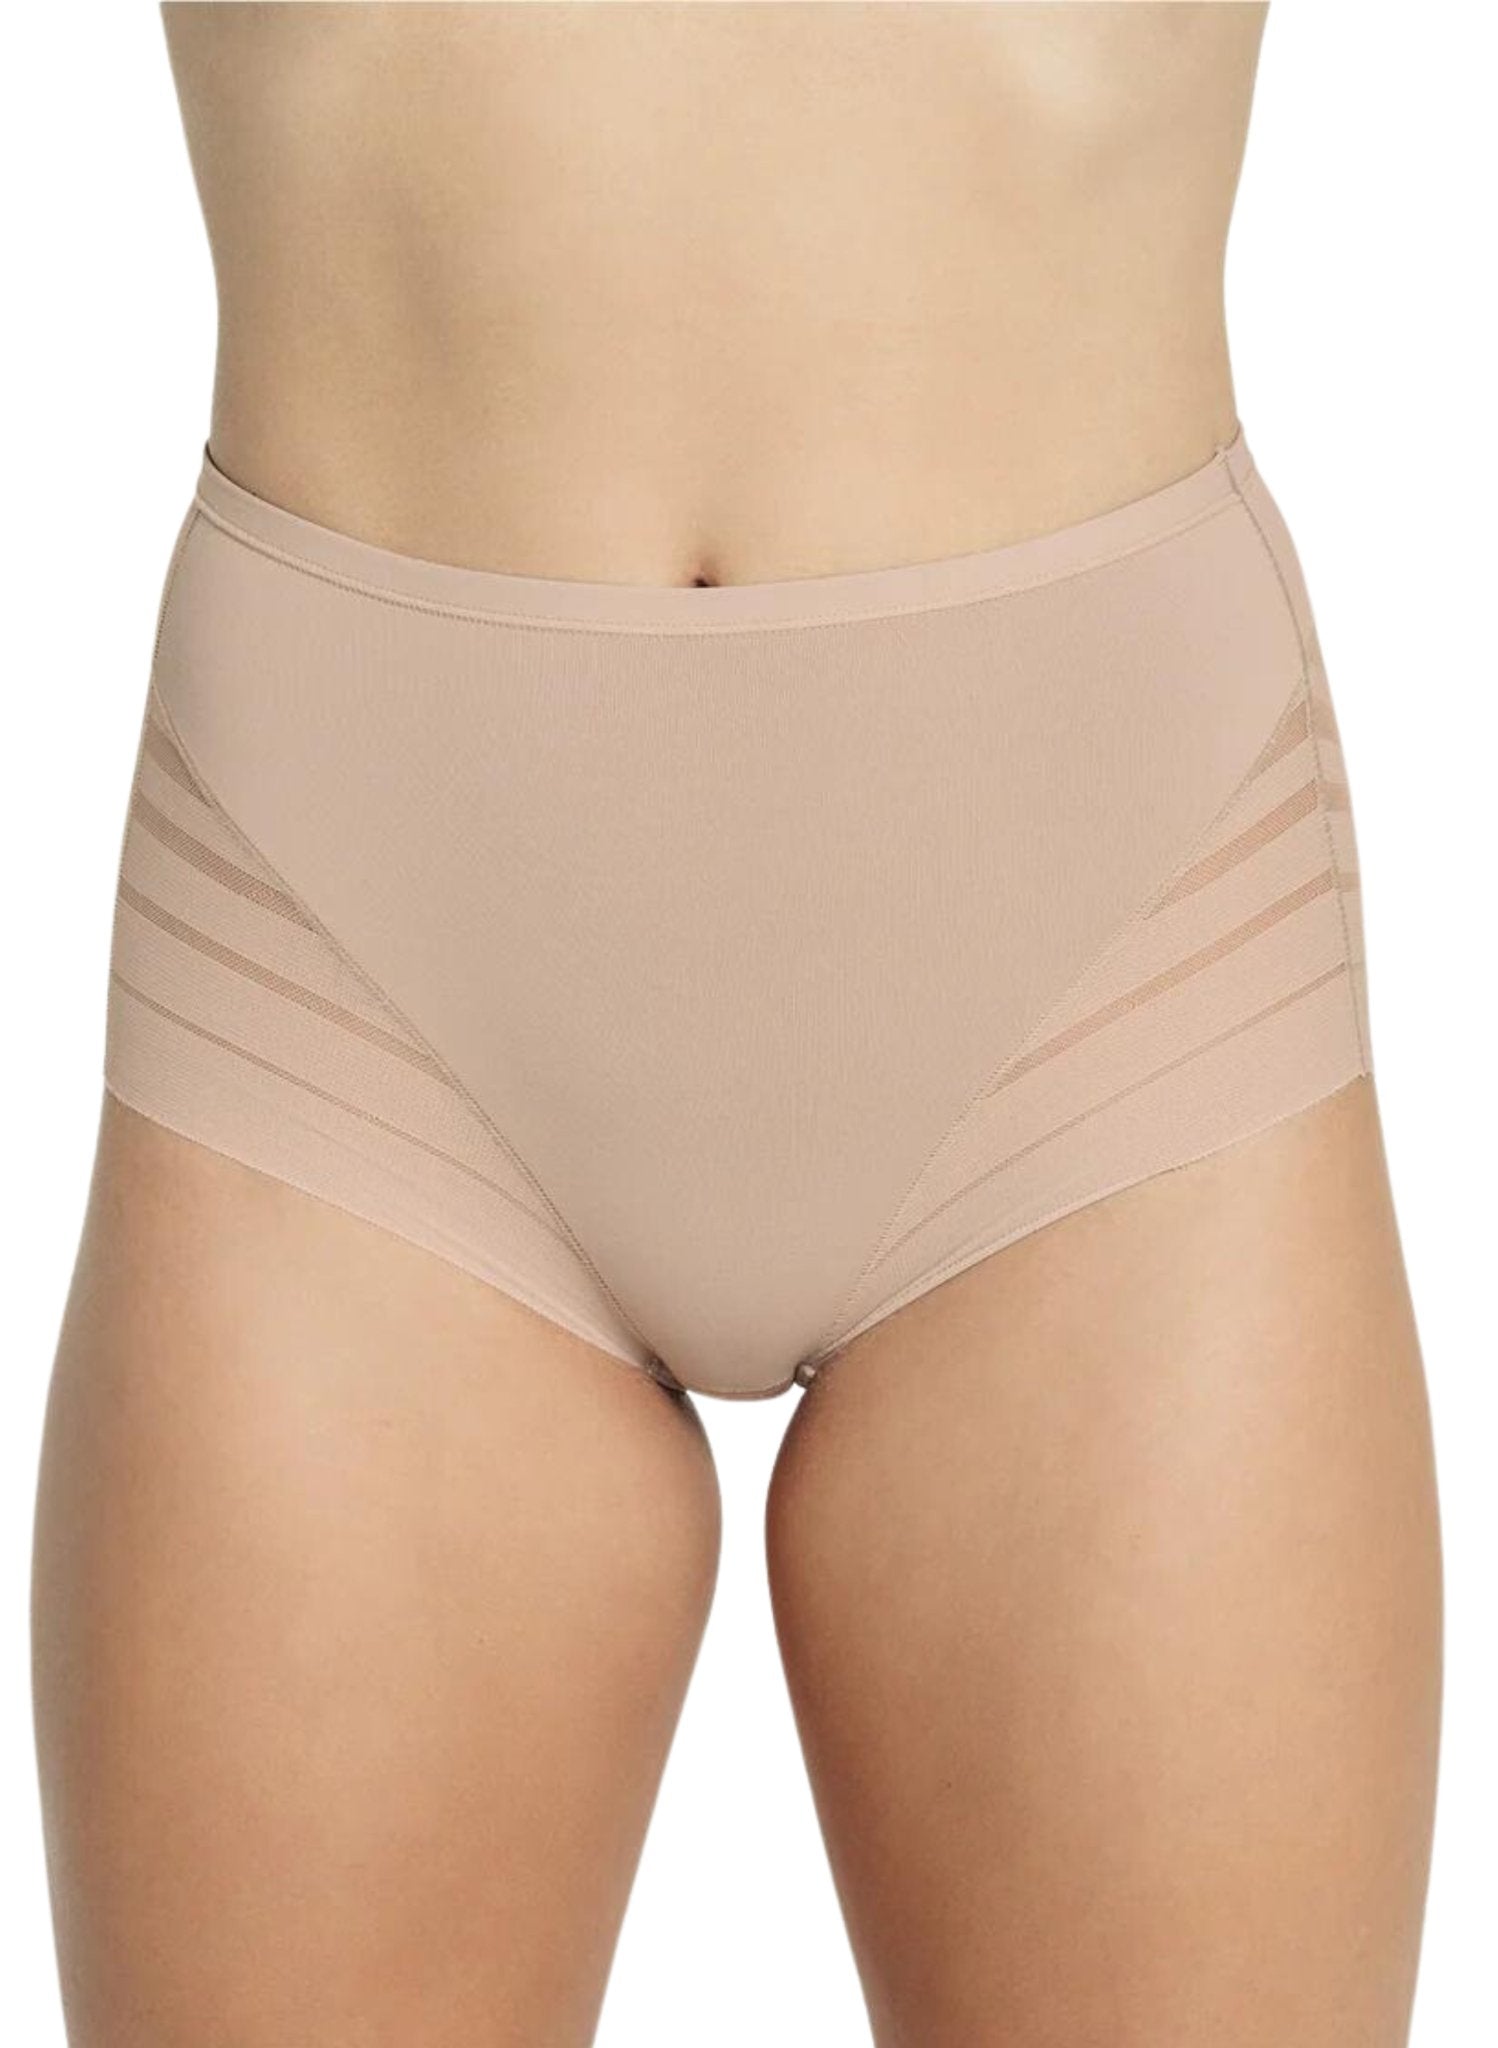 Lace Stripe Undetectable Classic Shaper Panty - Nude - Mums and Bumps